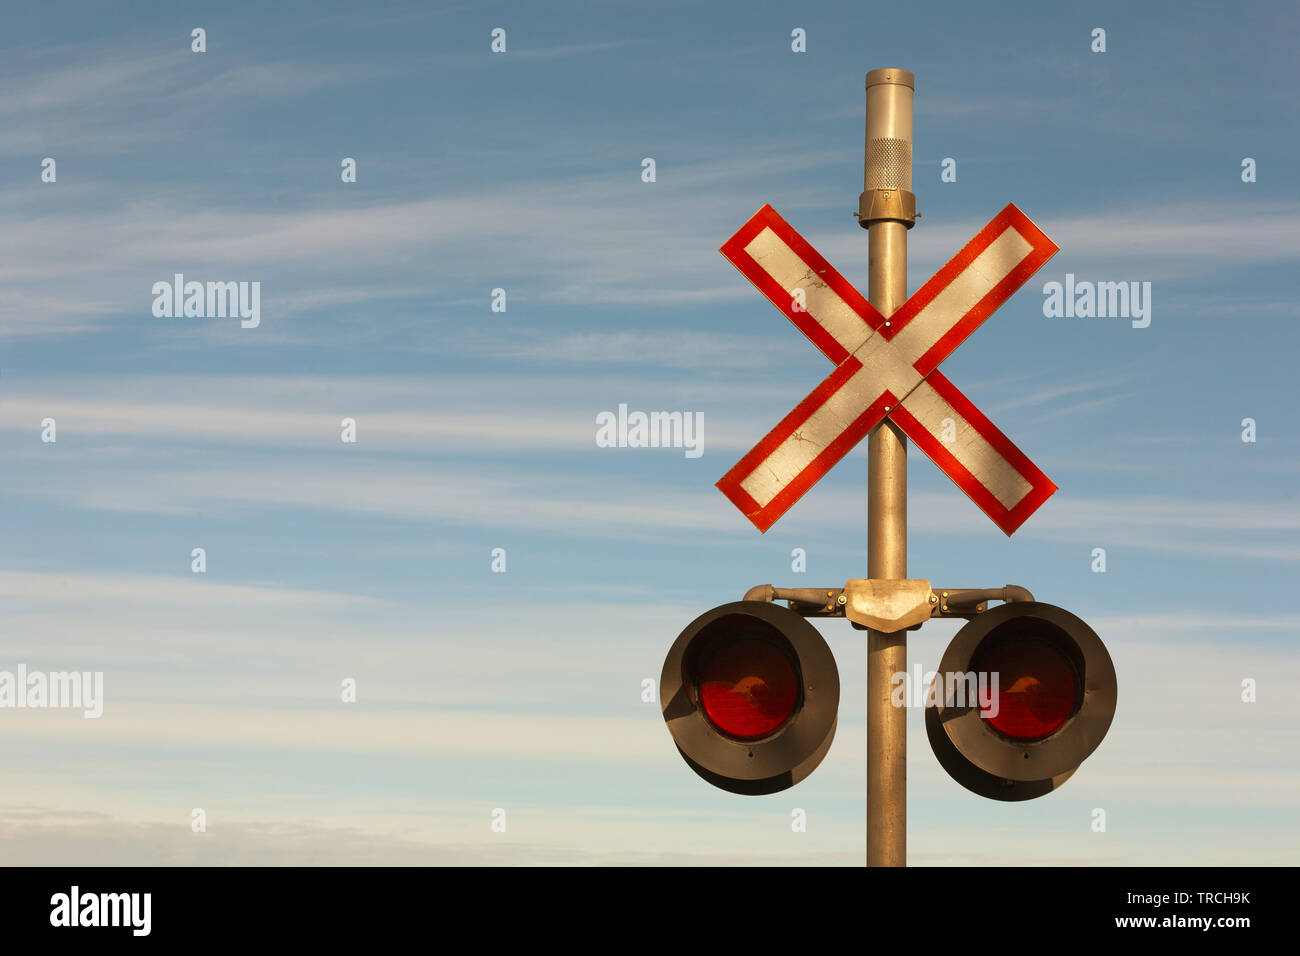 Railroad crossing signal lights and sign. Stock Photo